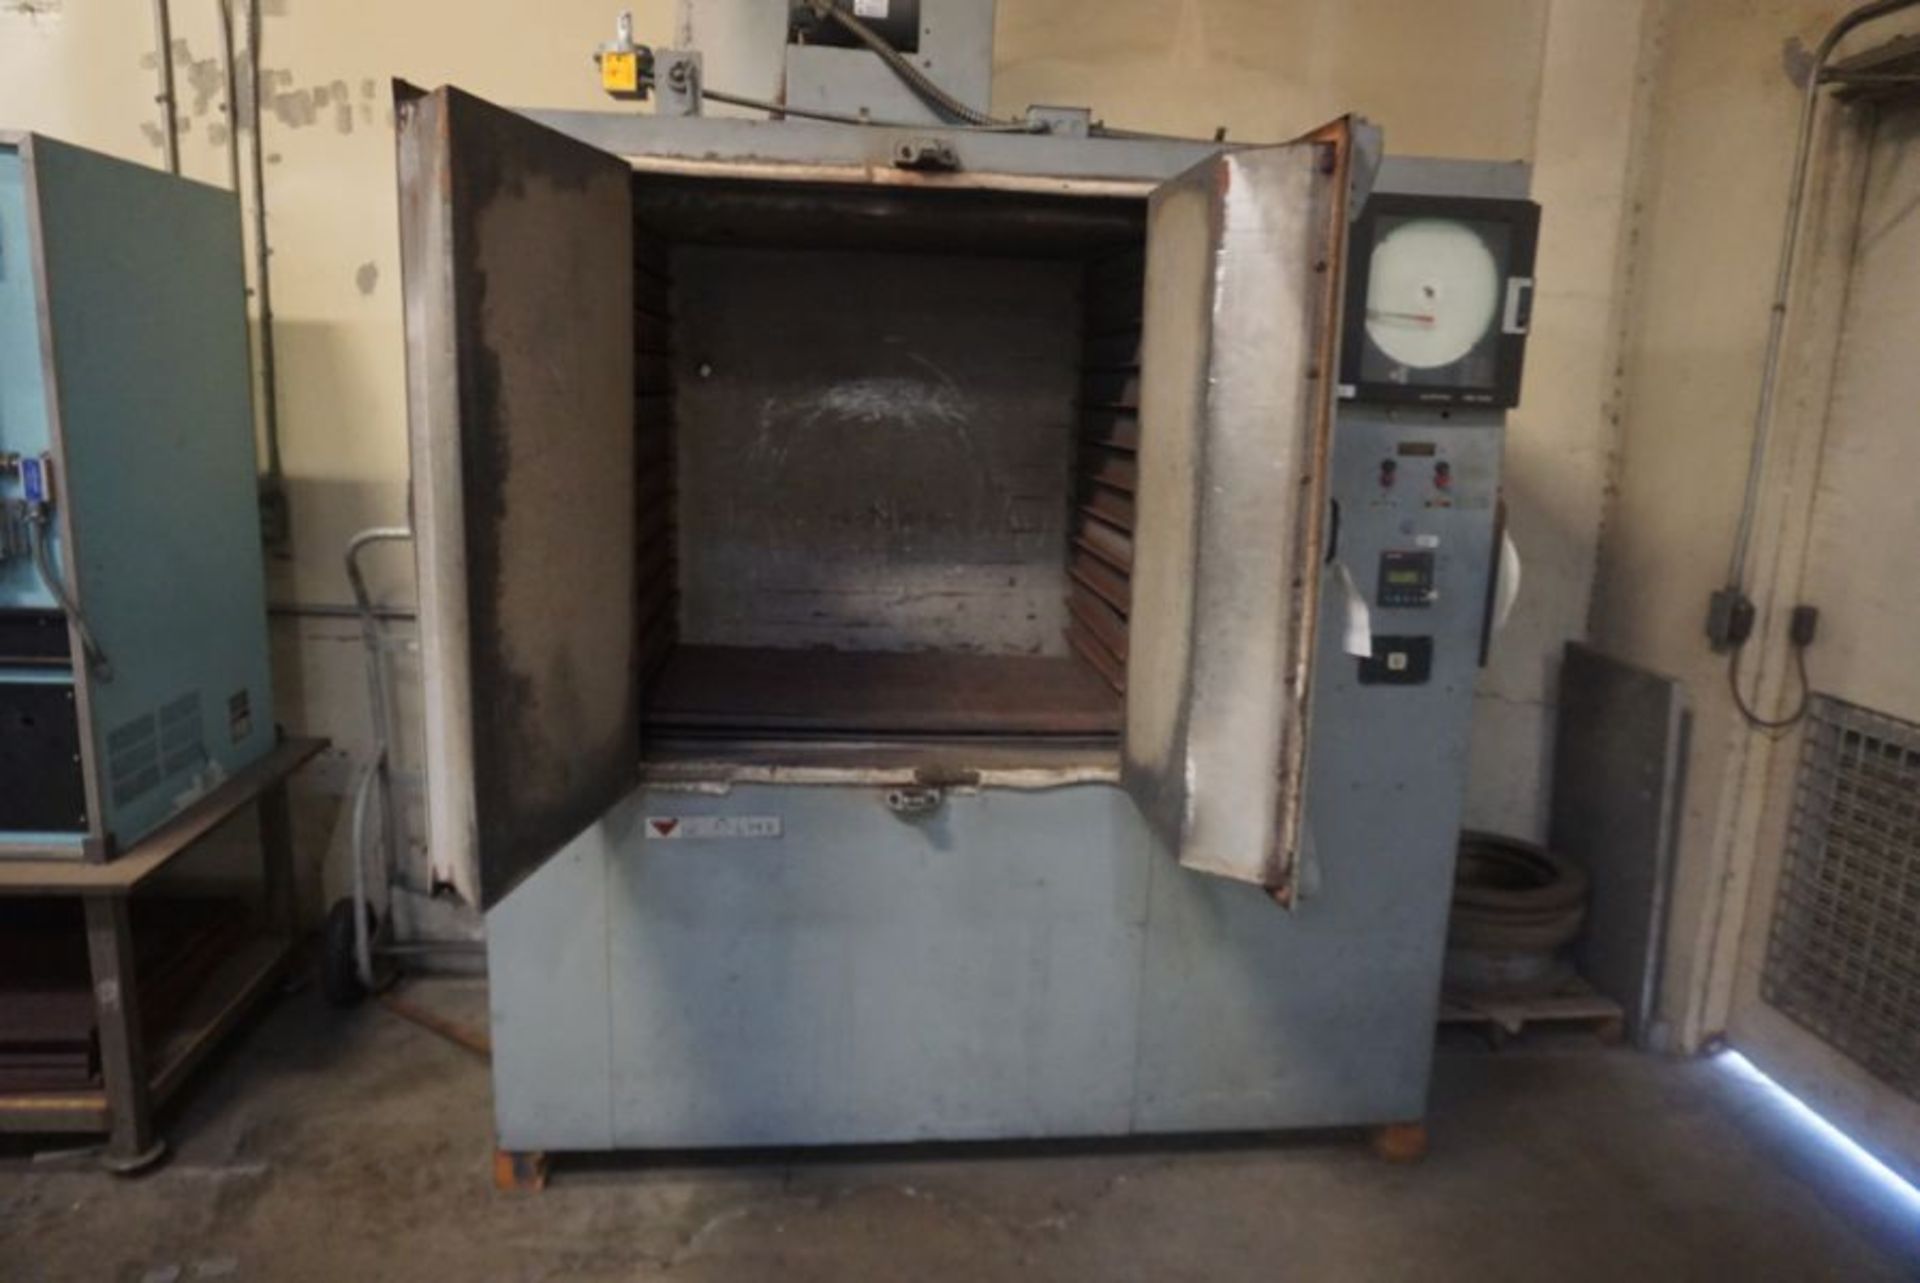 Despatch V-29SD 850 Degree Max. Temp. Curing Oven, s/n 93275 - Image 4 of 6